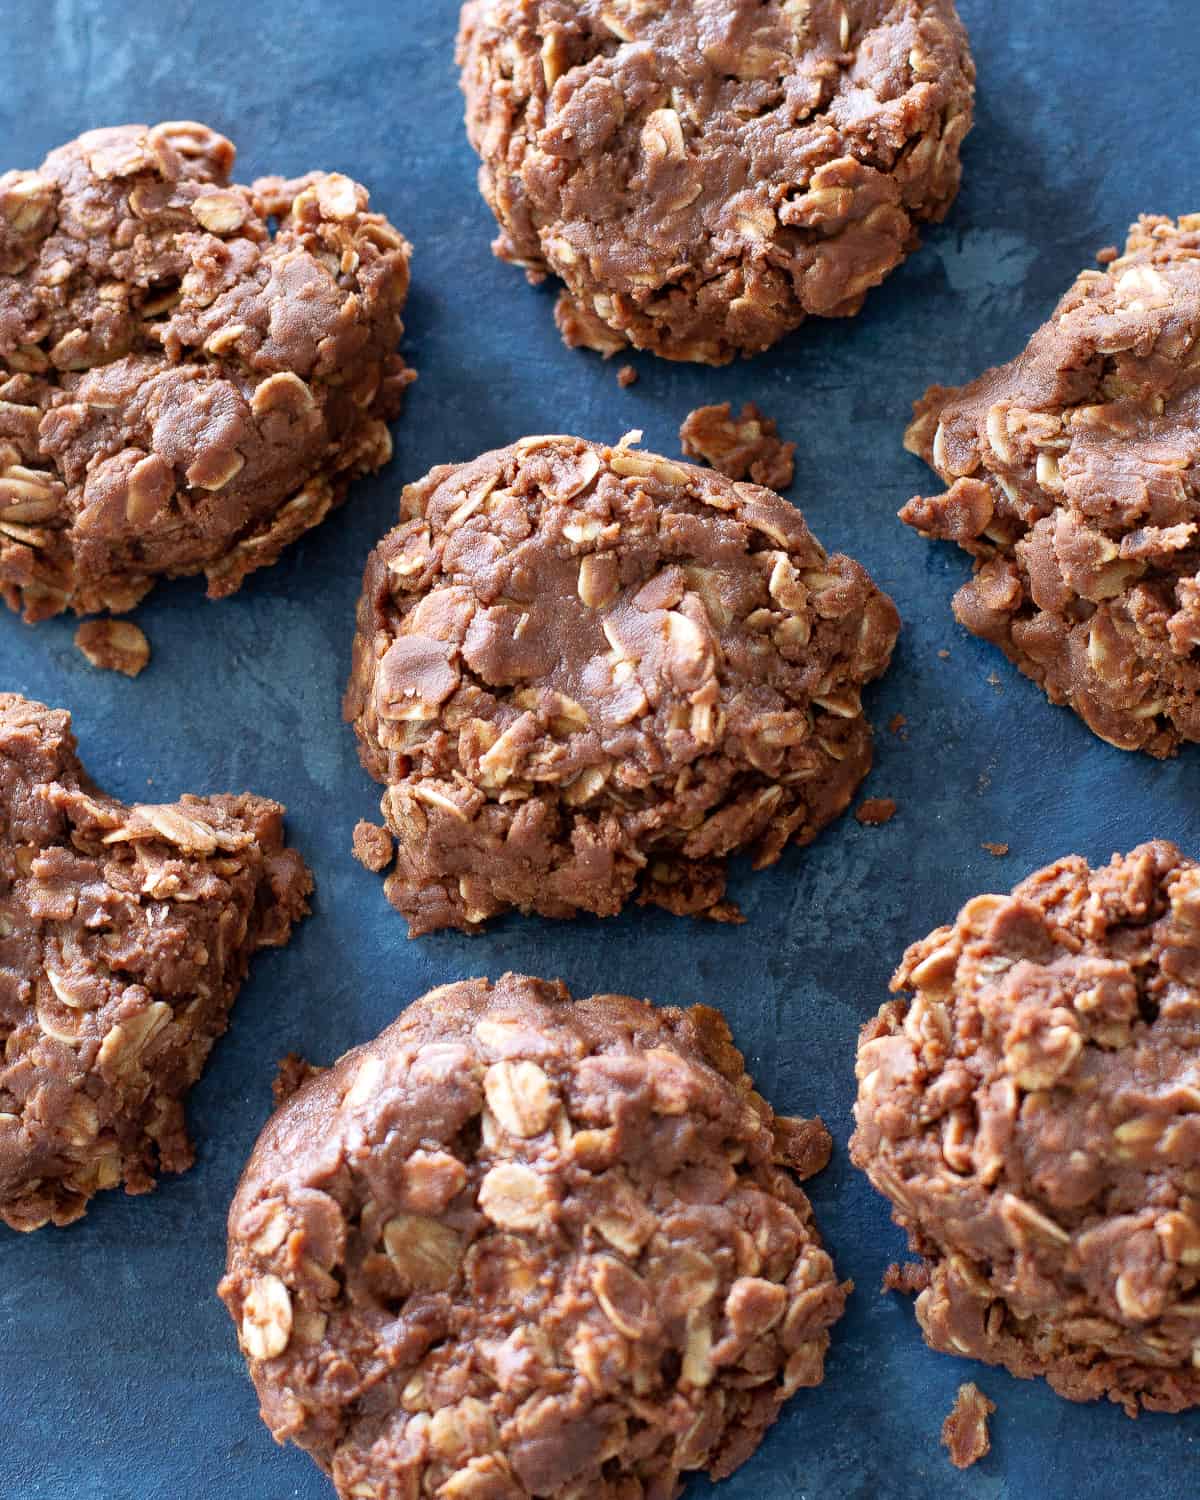 https://www.the-girl-who-ate-everything.com/wp-content/uploads/2019/08/no-bake-cookies-4.jpg